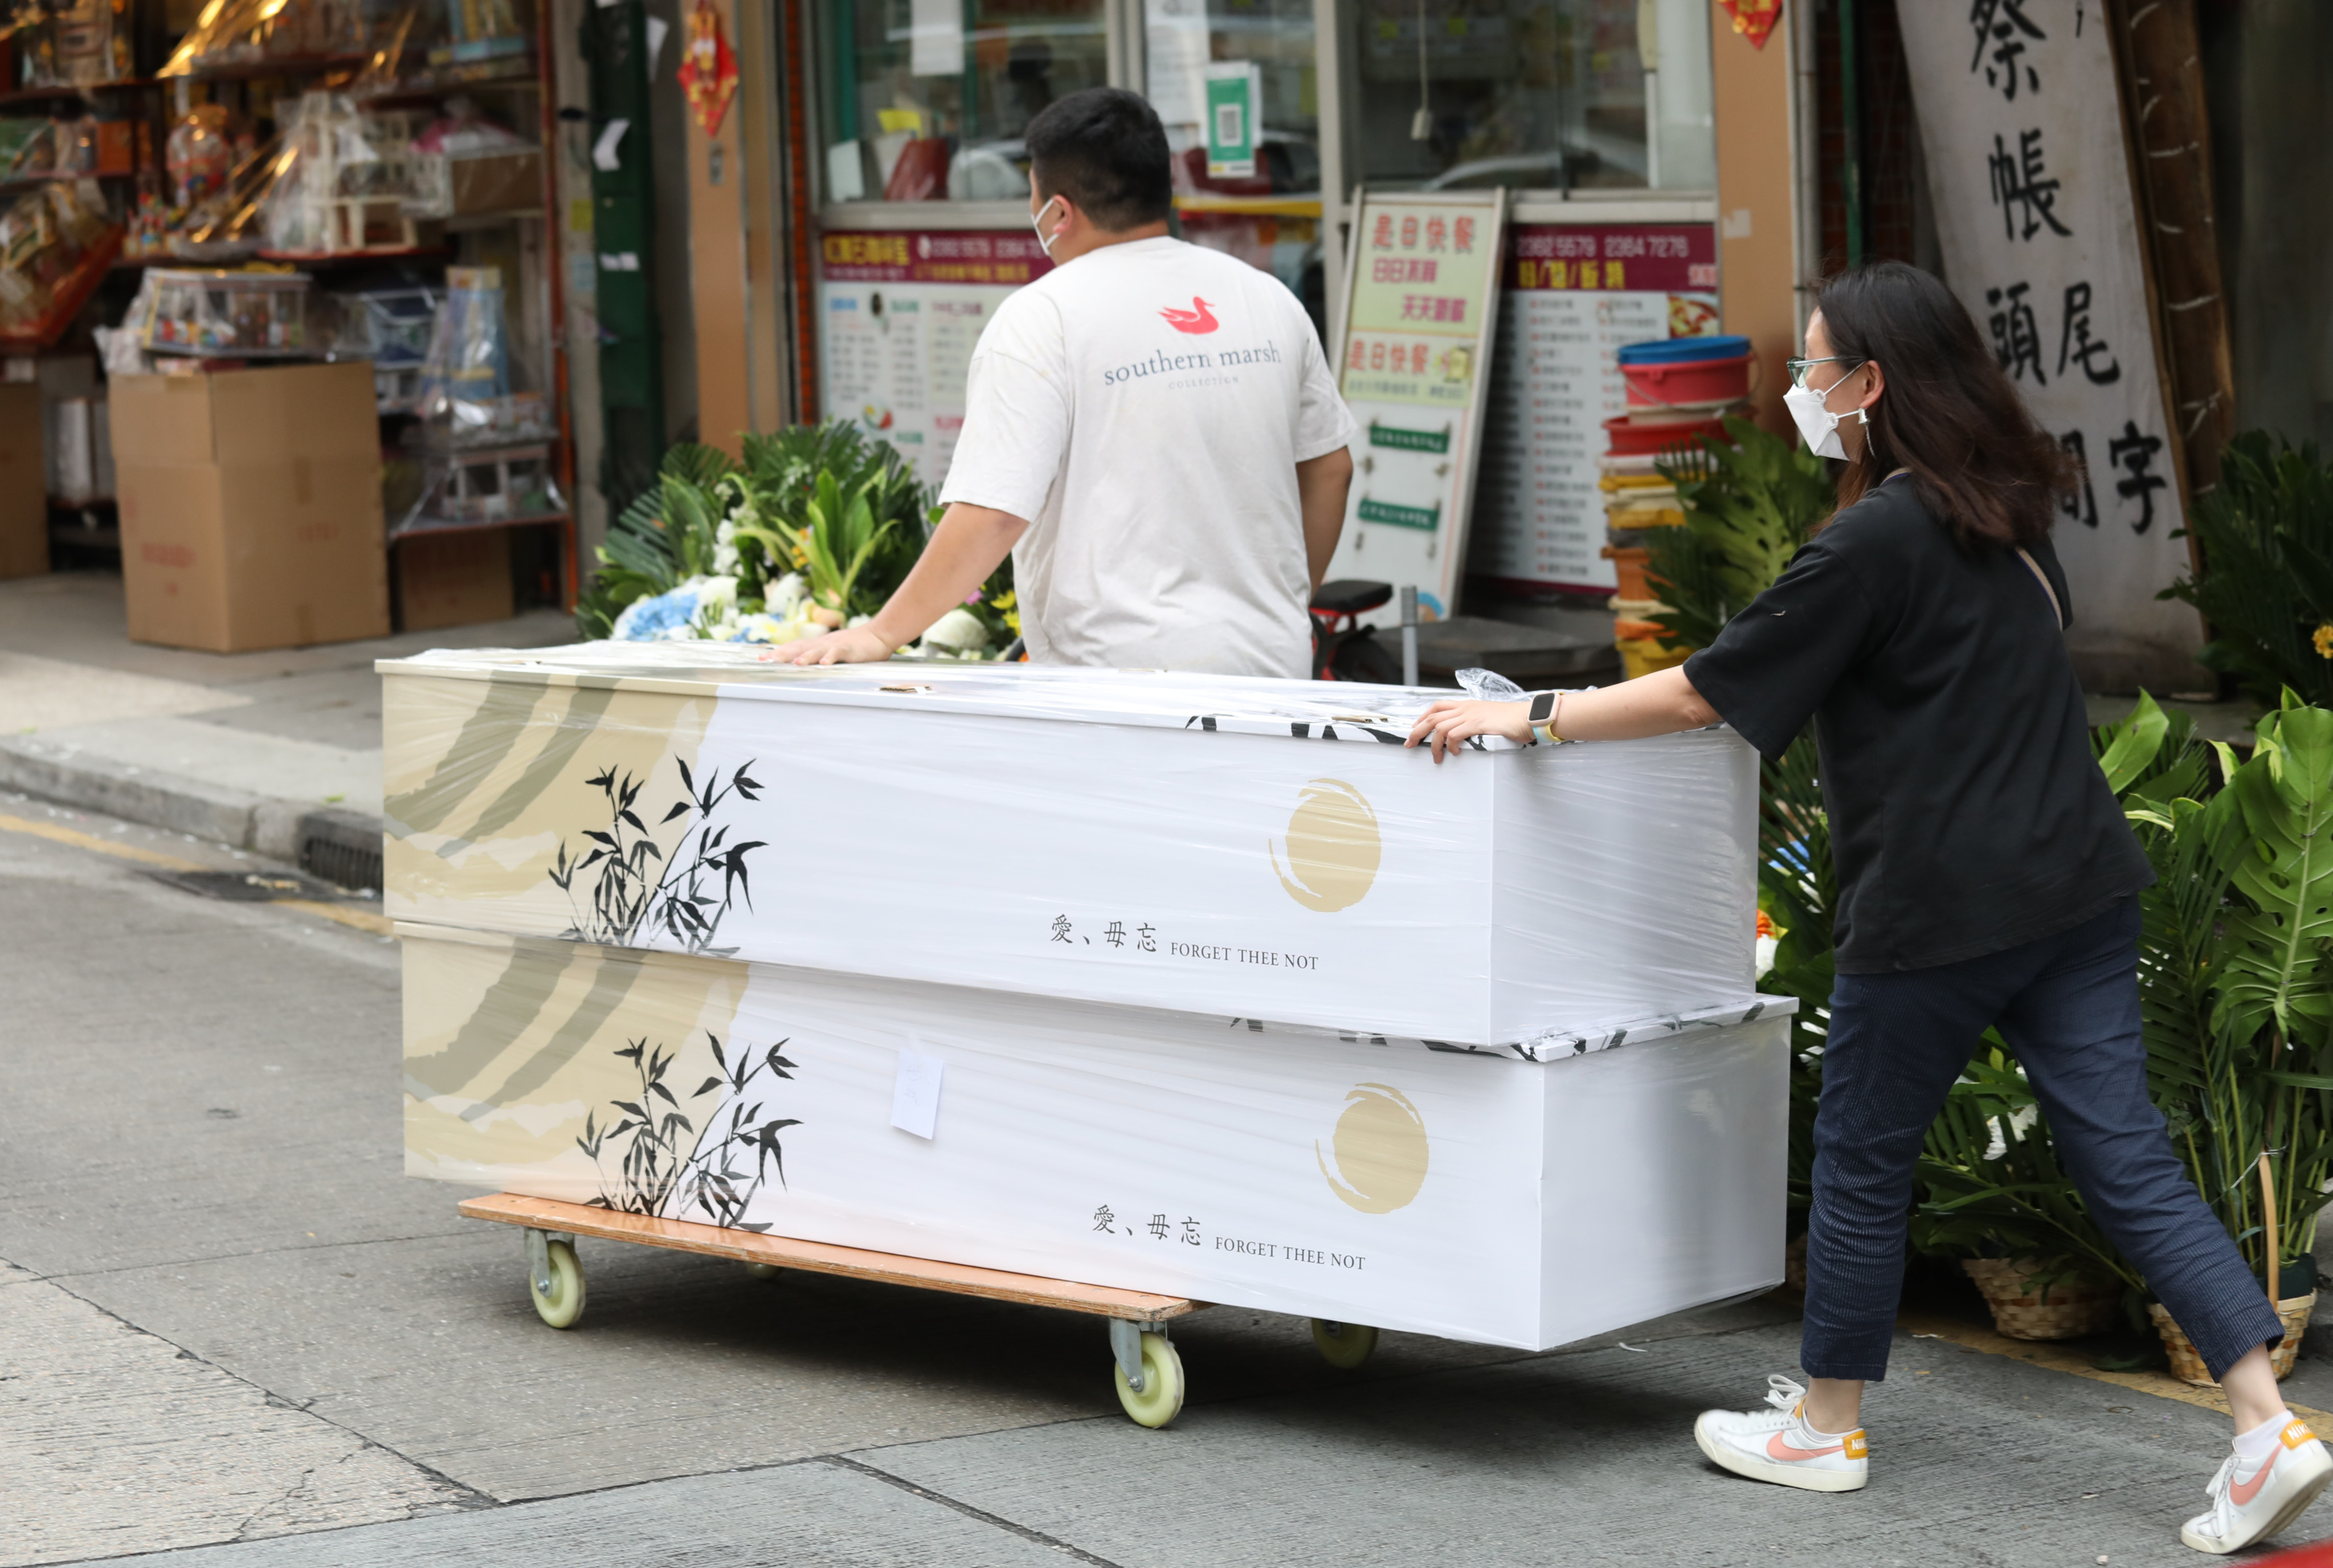 Workers transfer a coffin outside a funeral services shop in Hung Hom district in Hong Kong on March 16. Photo: Yik Yeung-man